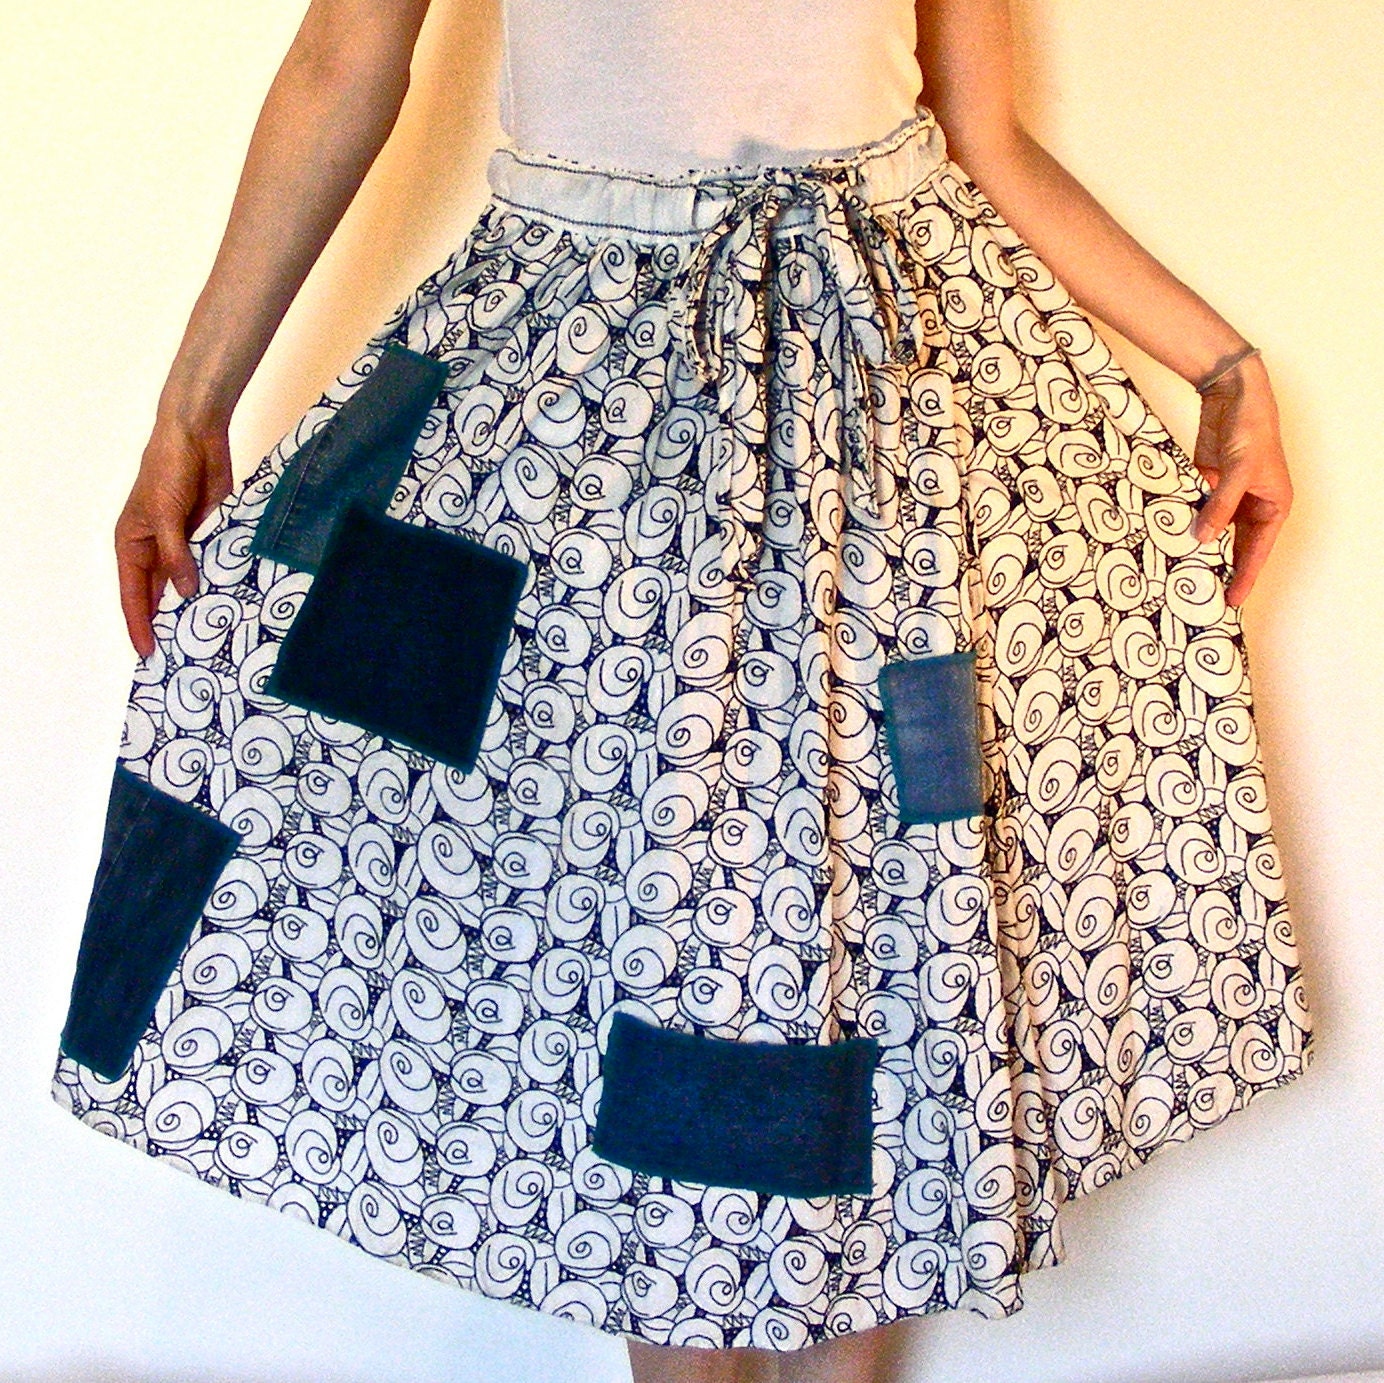 Wrap Skirt with Embroidered Eyelet Lace, Drawstring Waist and Ten Pockets, Upcycled Denim Patchwork with Serged Edges, Women's Small - lovemadevisiblestore